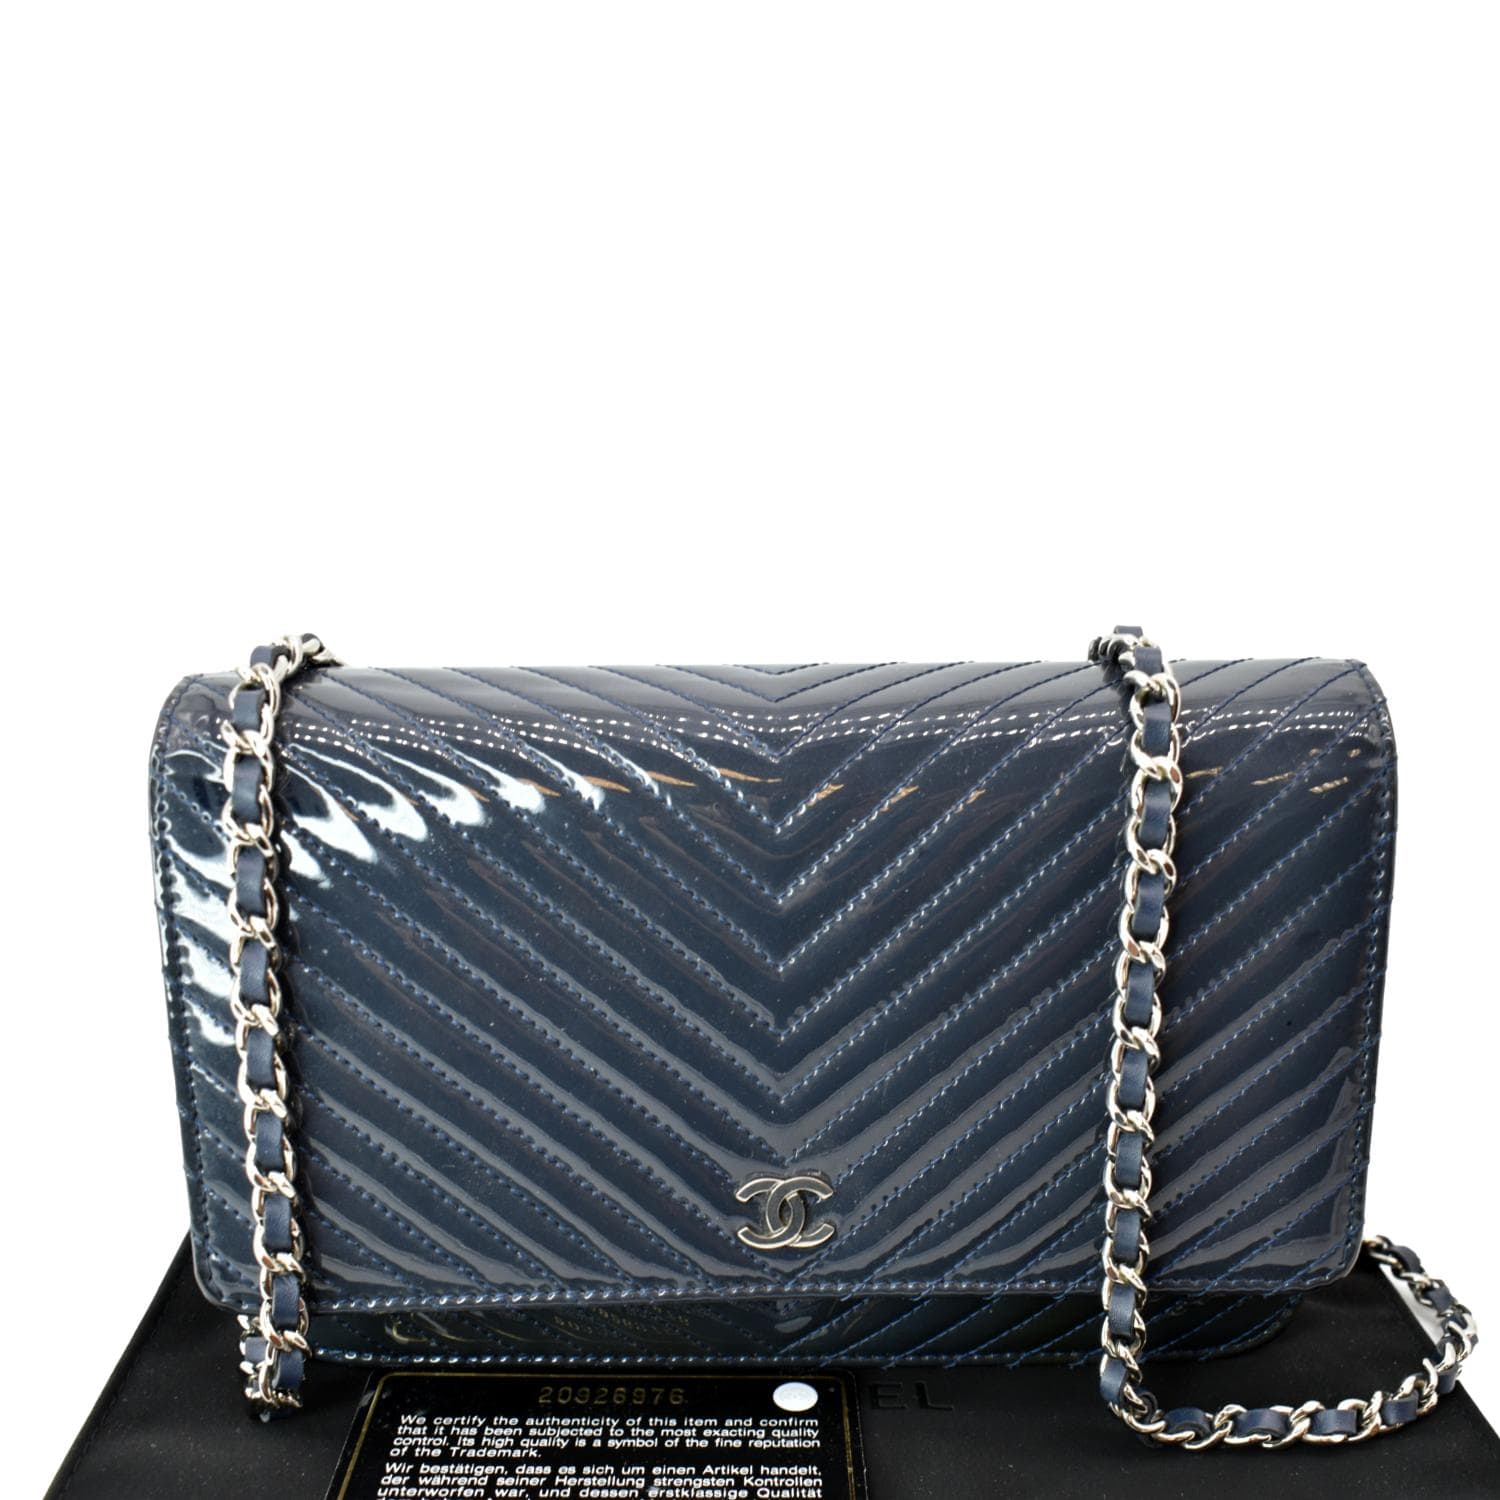 Chanel Wallet on Chain Shoulder Bag in Black Patent Quilted Leather